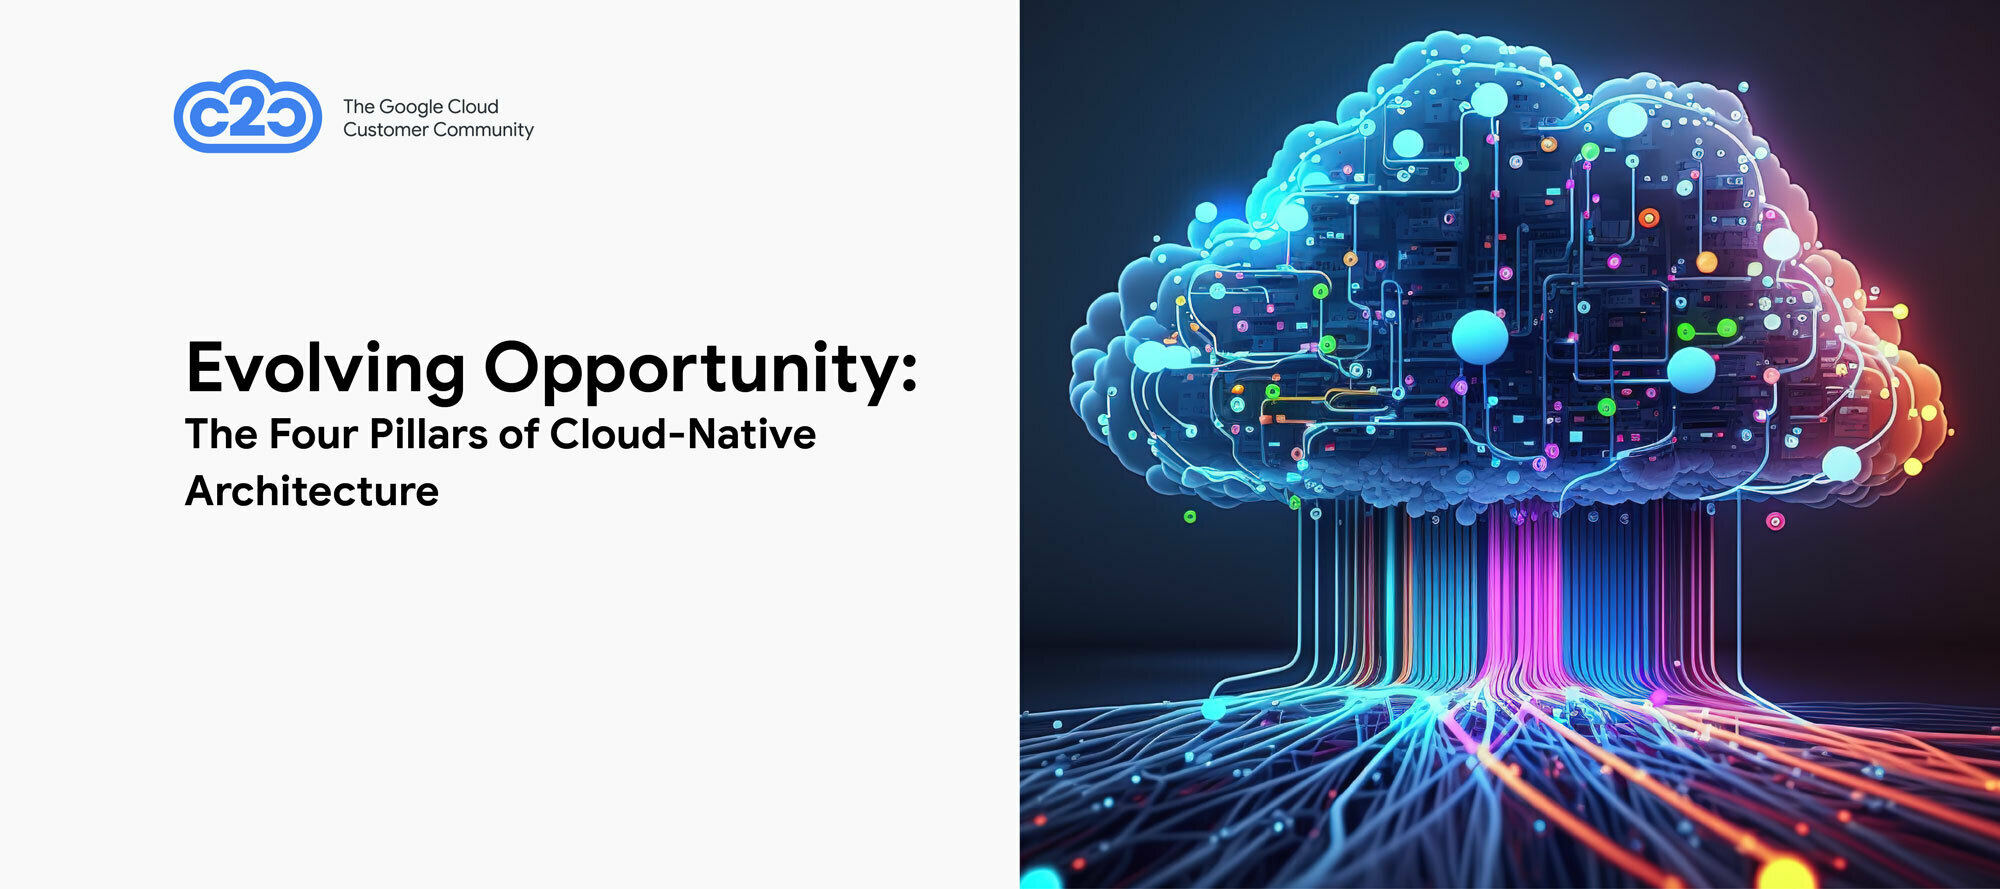 Evolving Opportunity: The Four Pillars of Cloud-Native Architecture